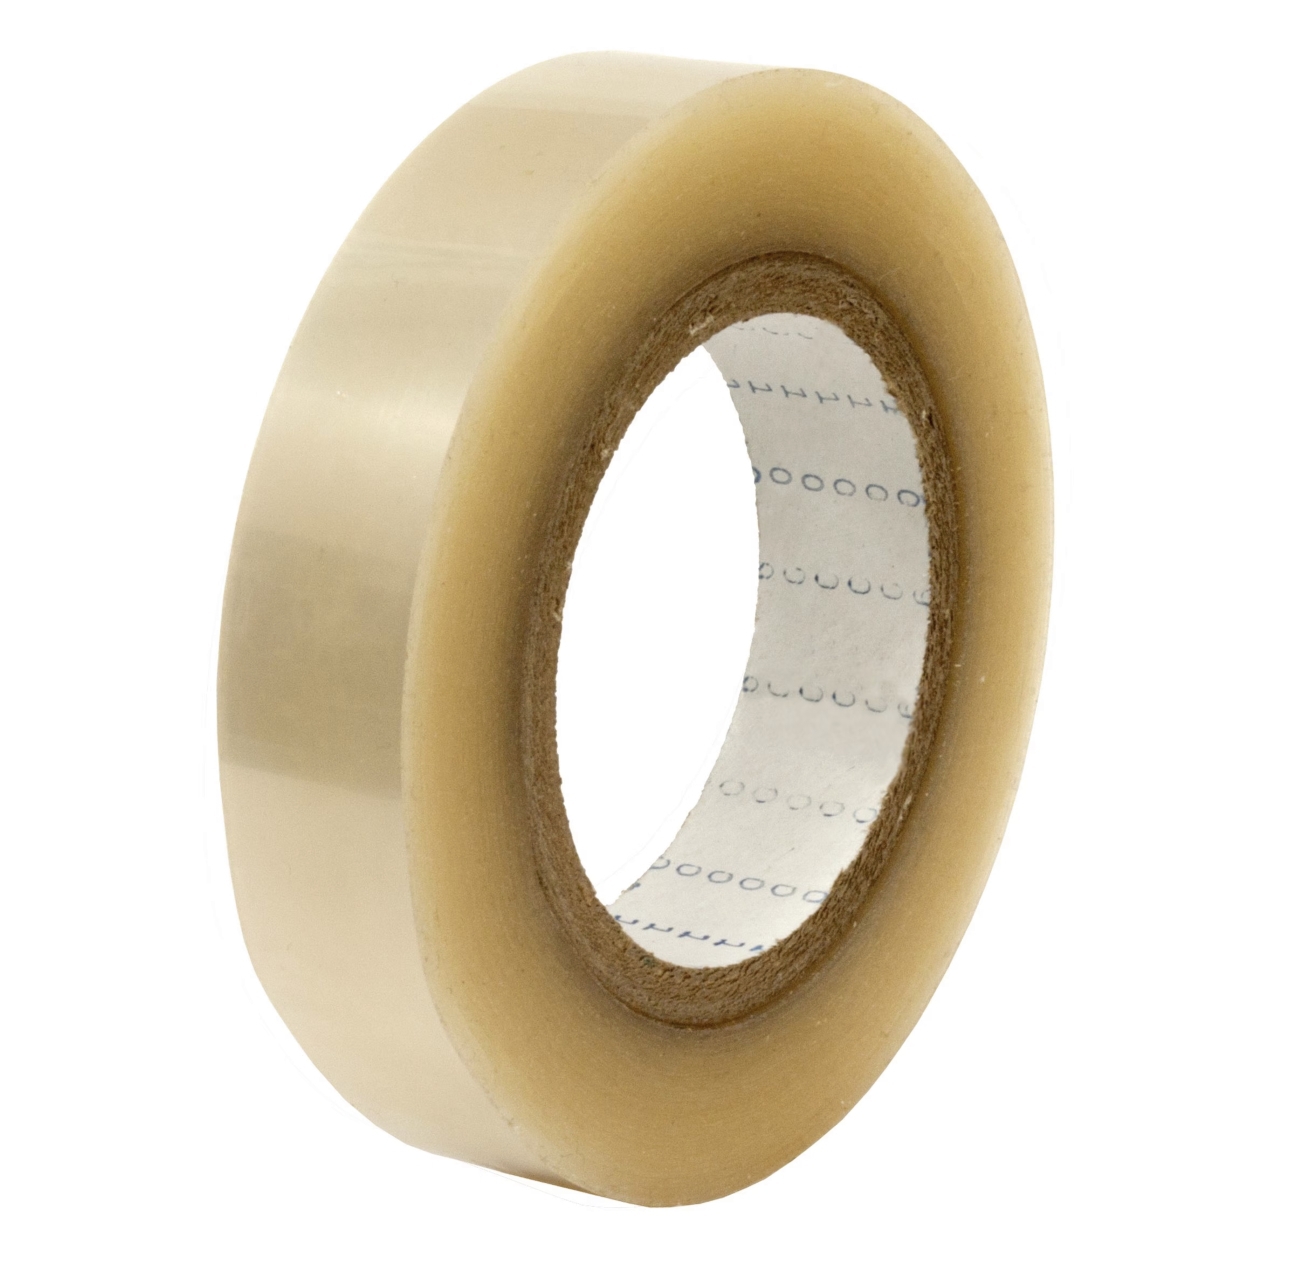 S-K-S dubbelzijdige kleefband met polyester drager 960, transparant, 100 mm x 66 m, siliconen kleefband, 0,085 mm